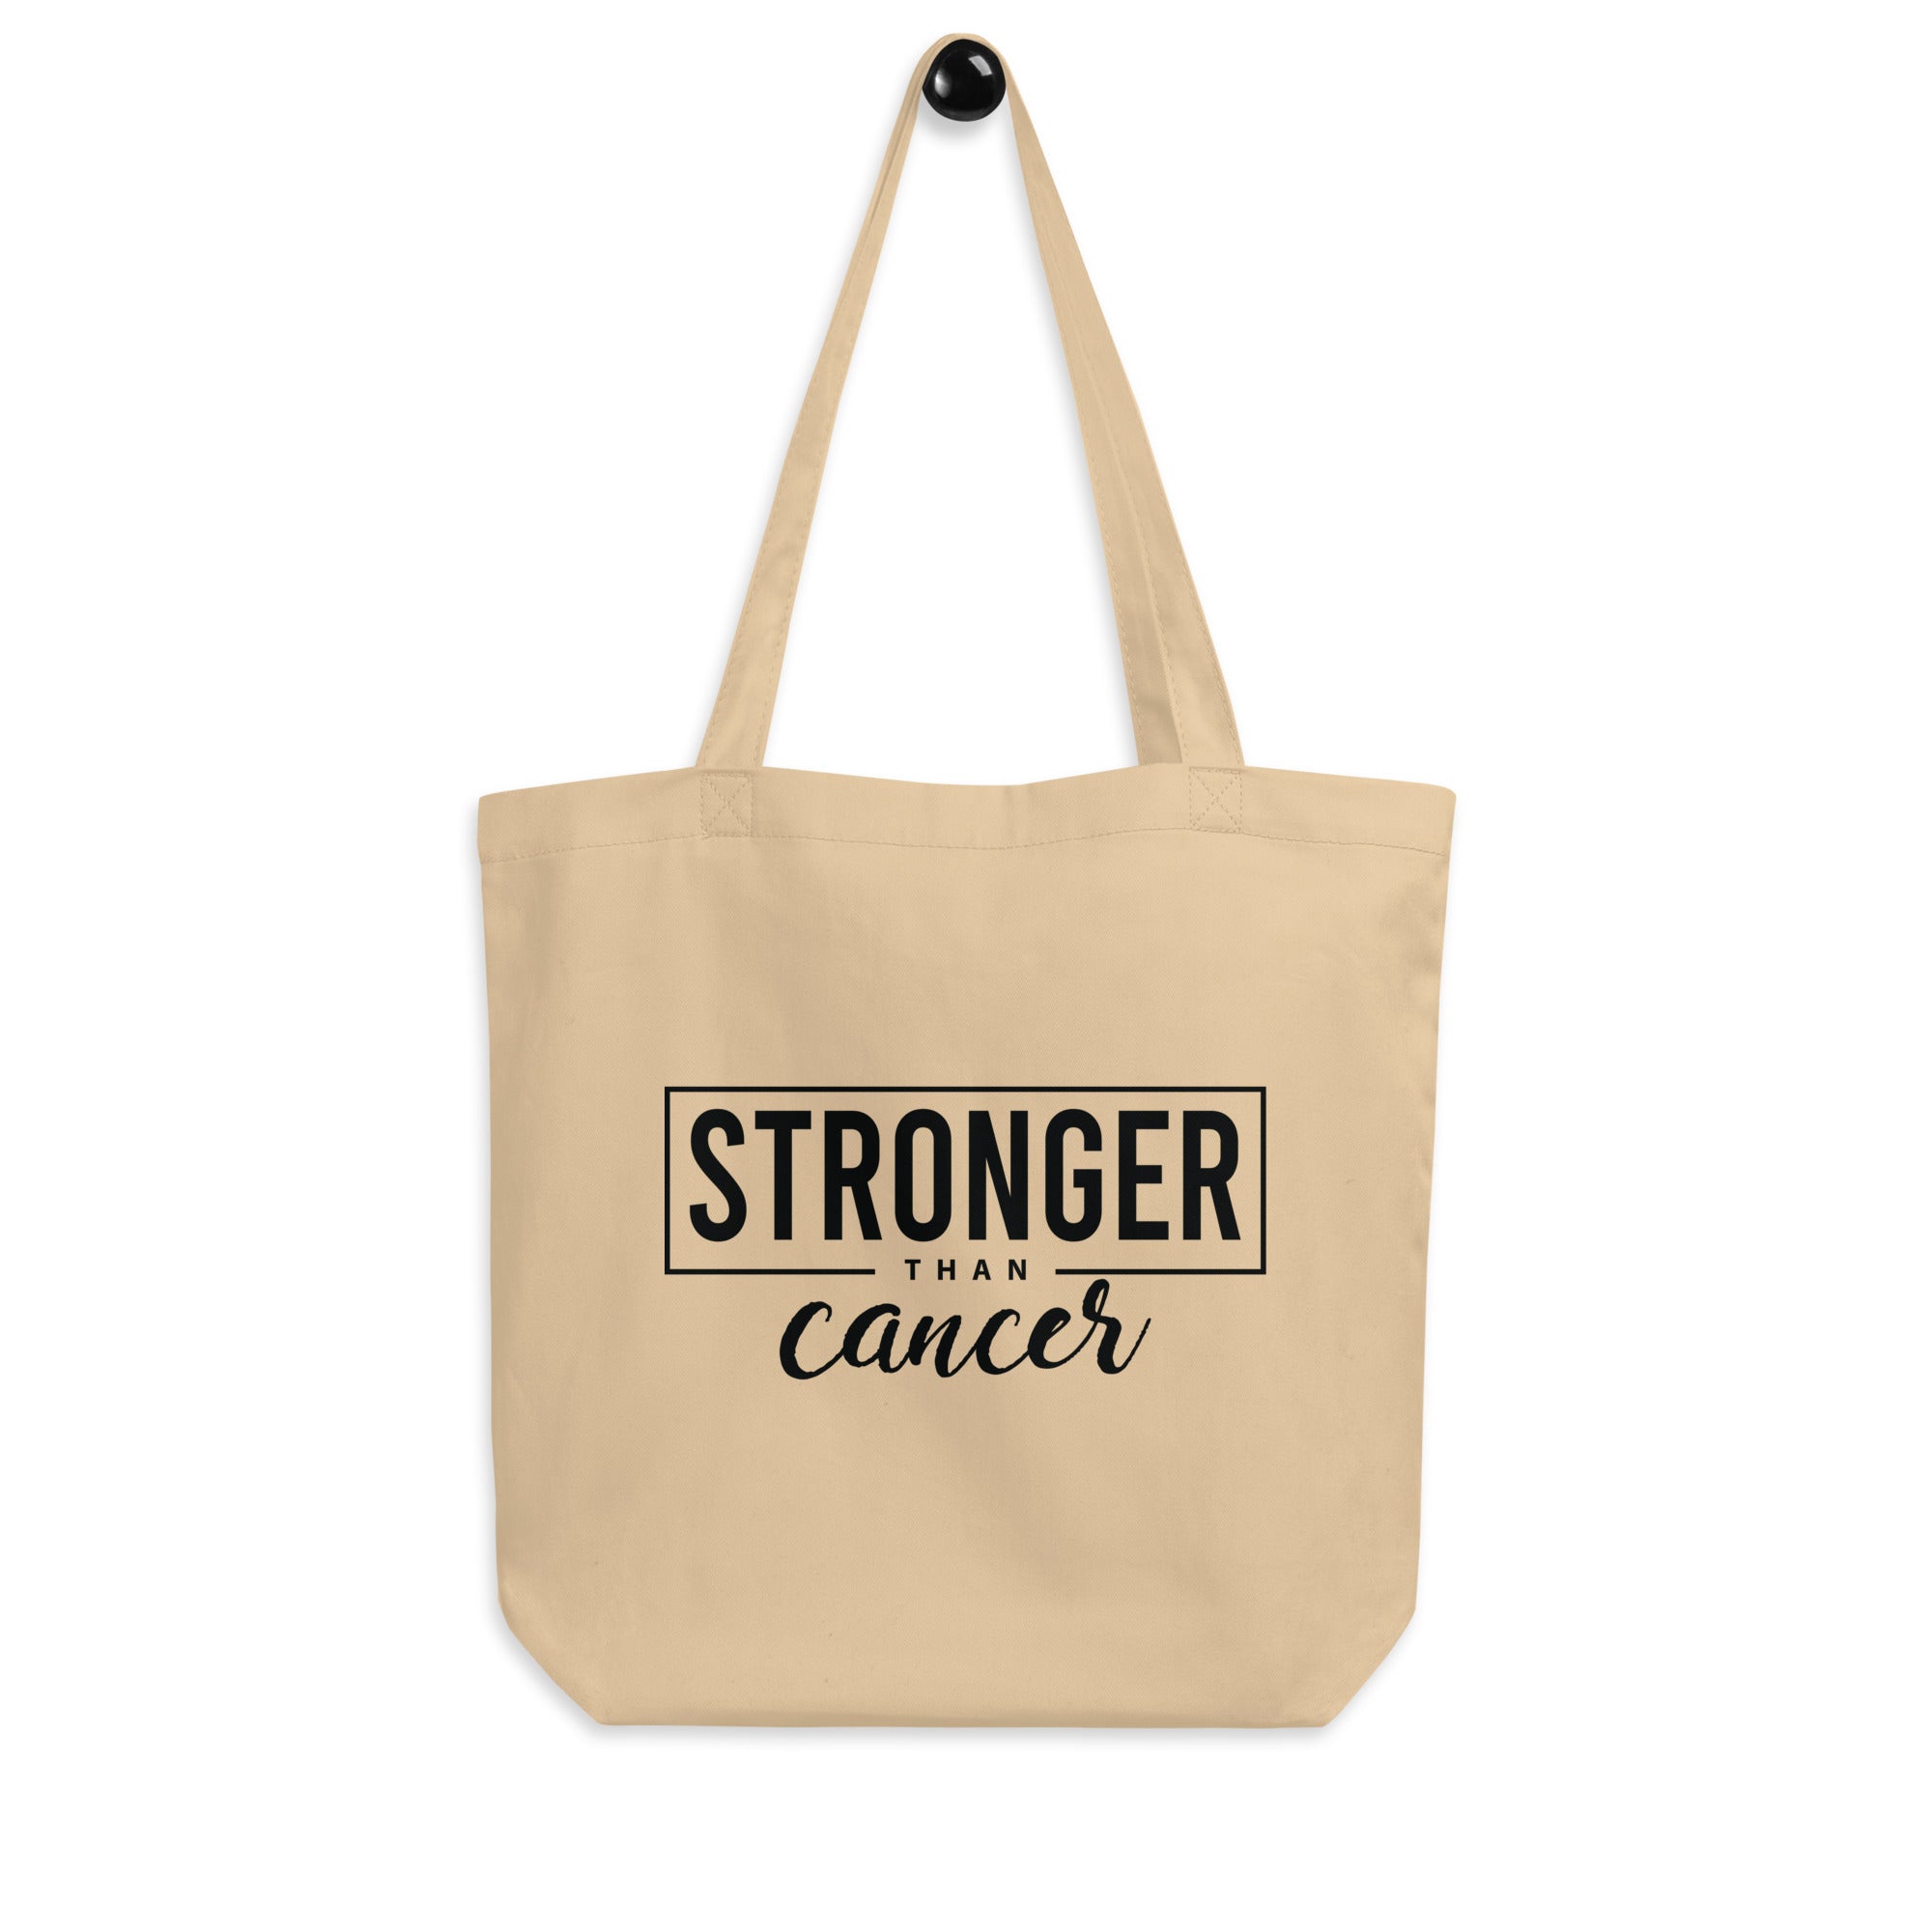 Stronger than Cancer Tote Bag